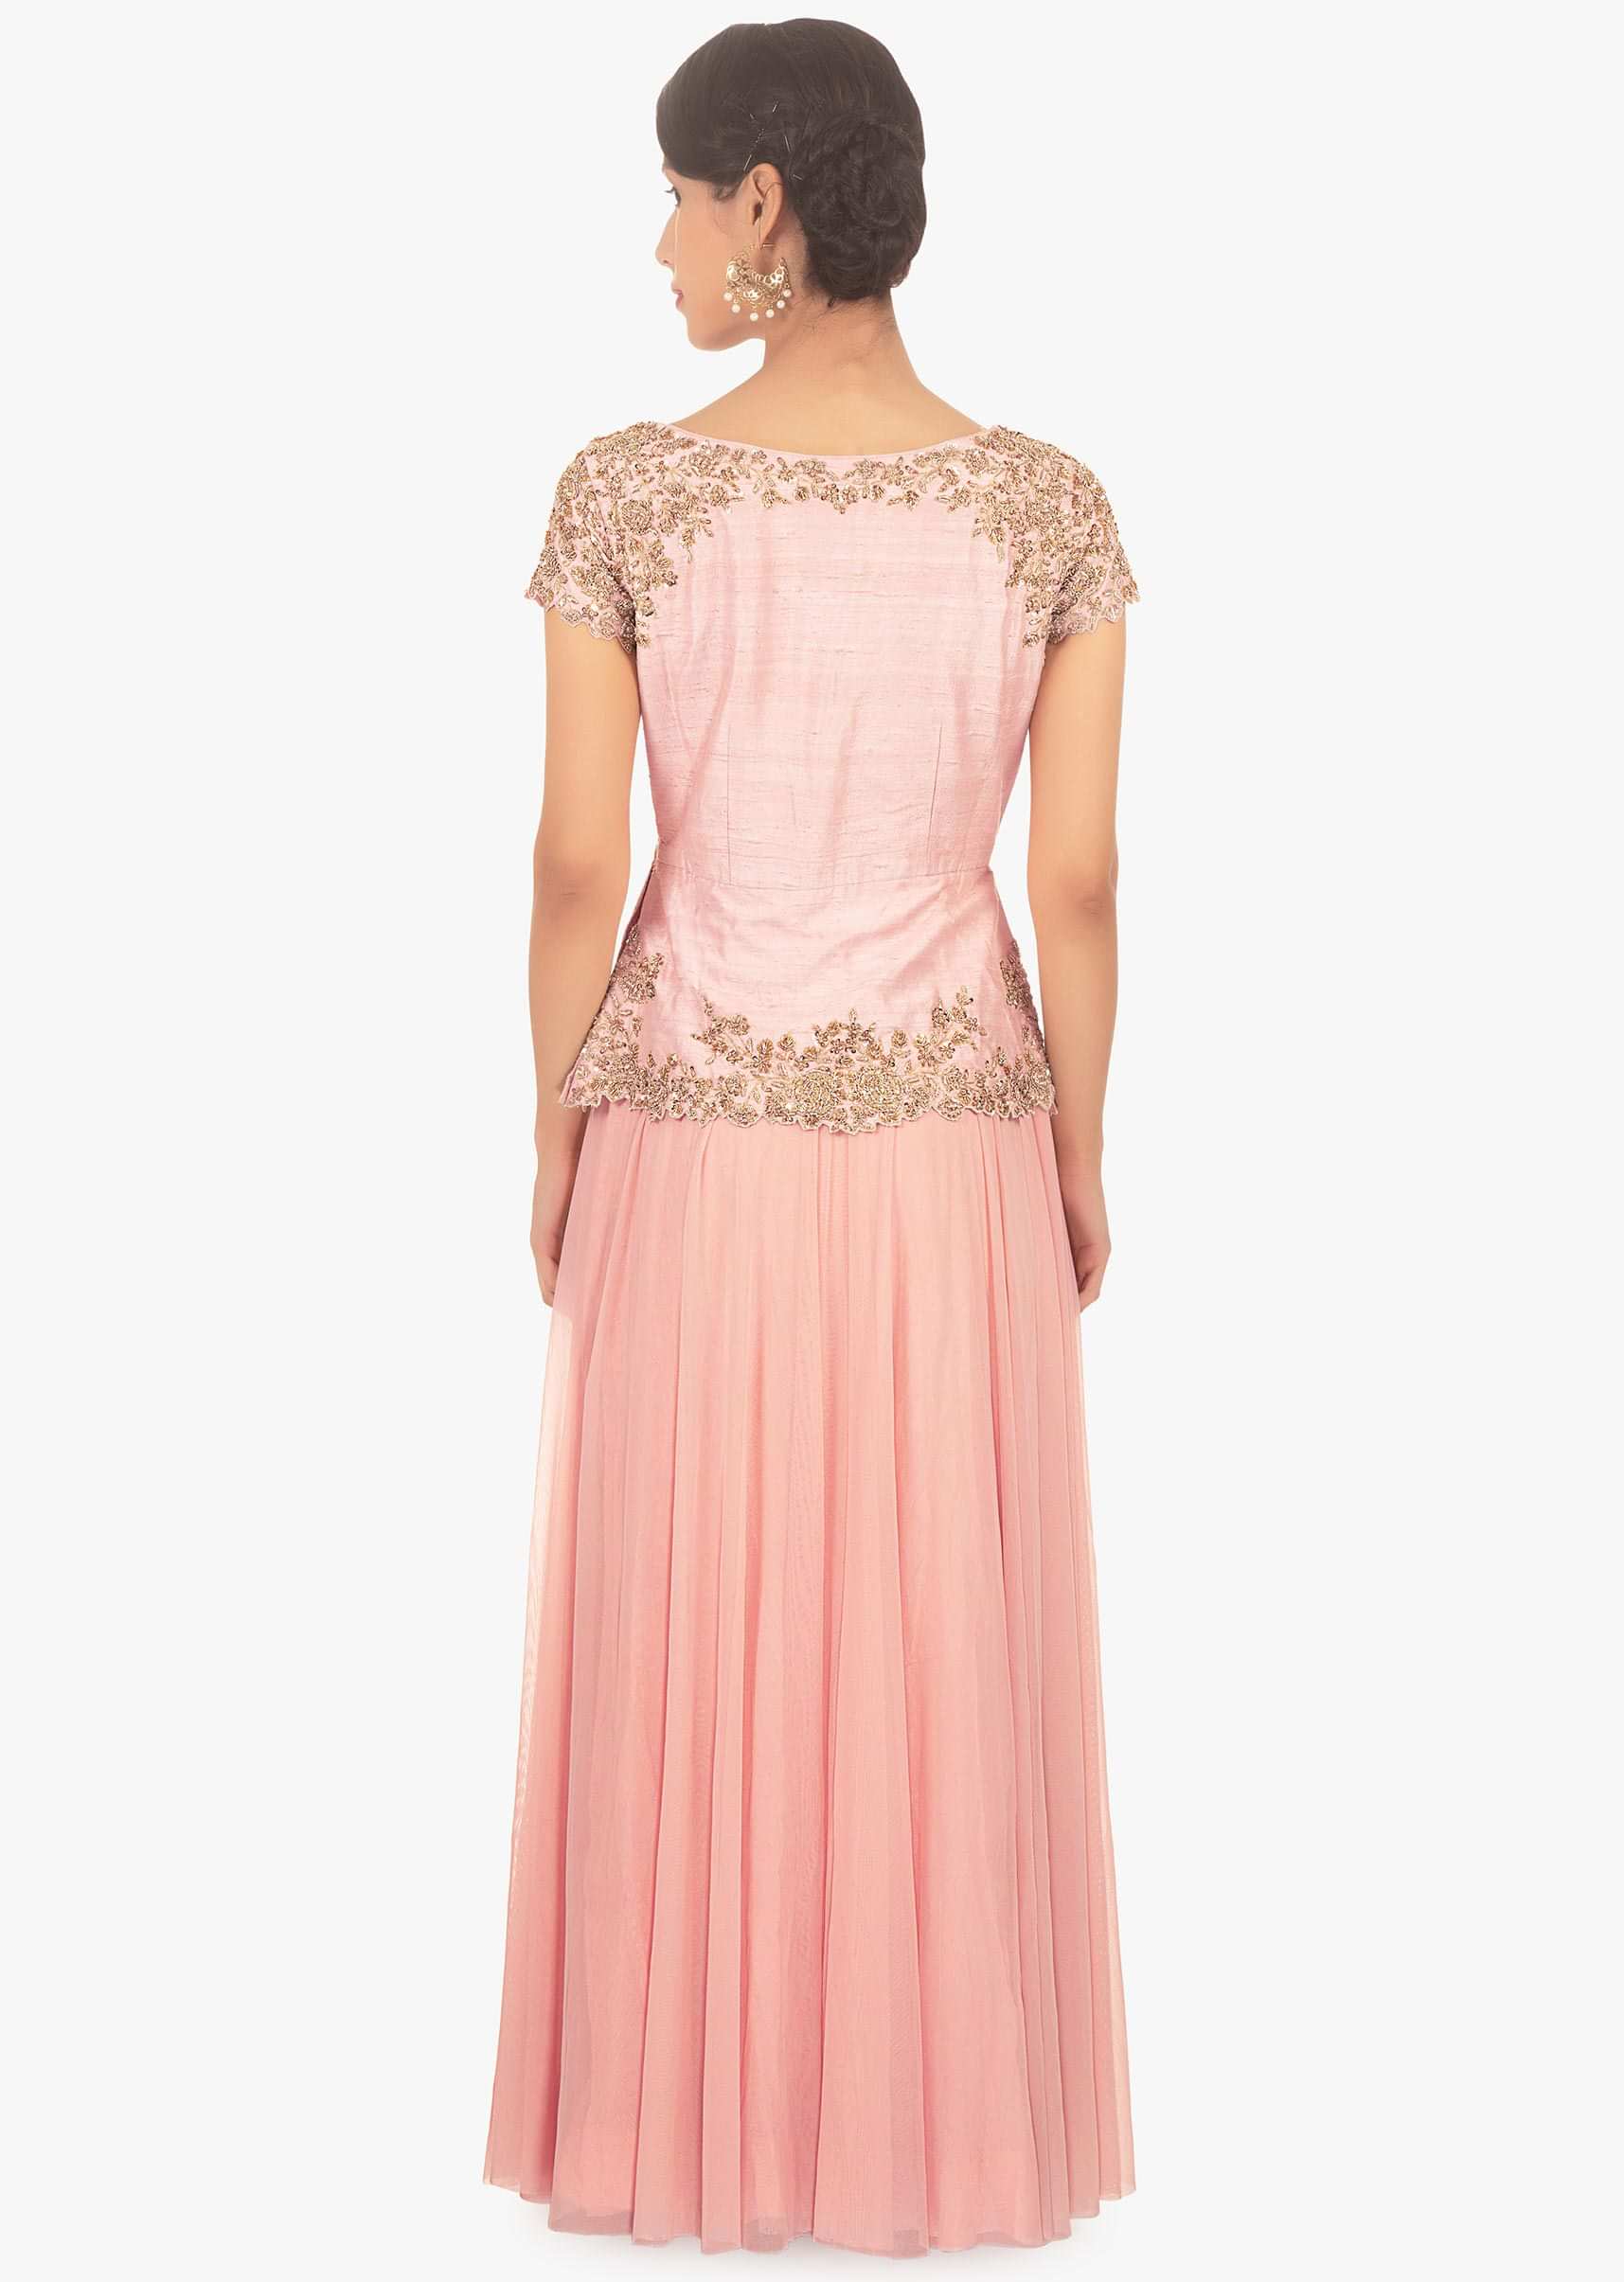 Peach long dress with pink bodice in peplum style